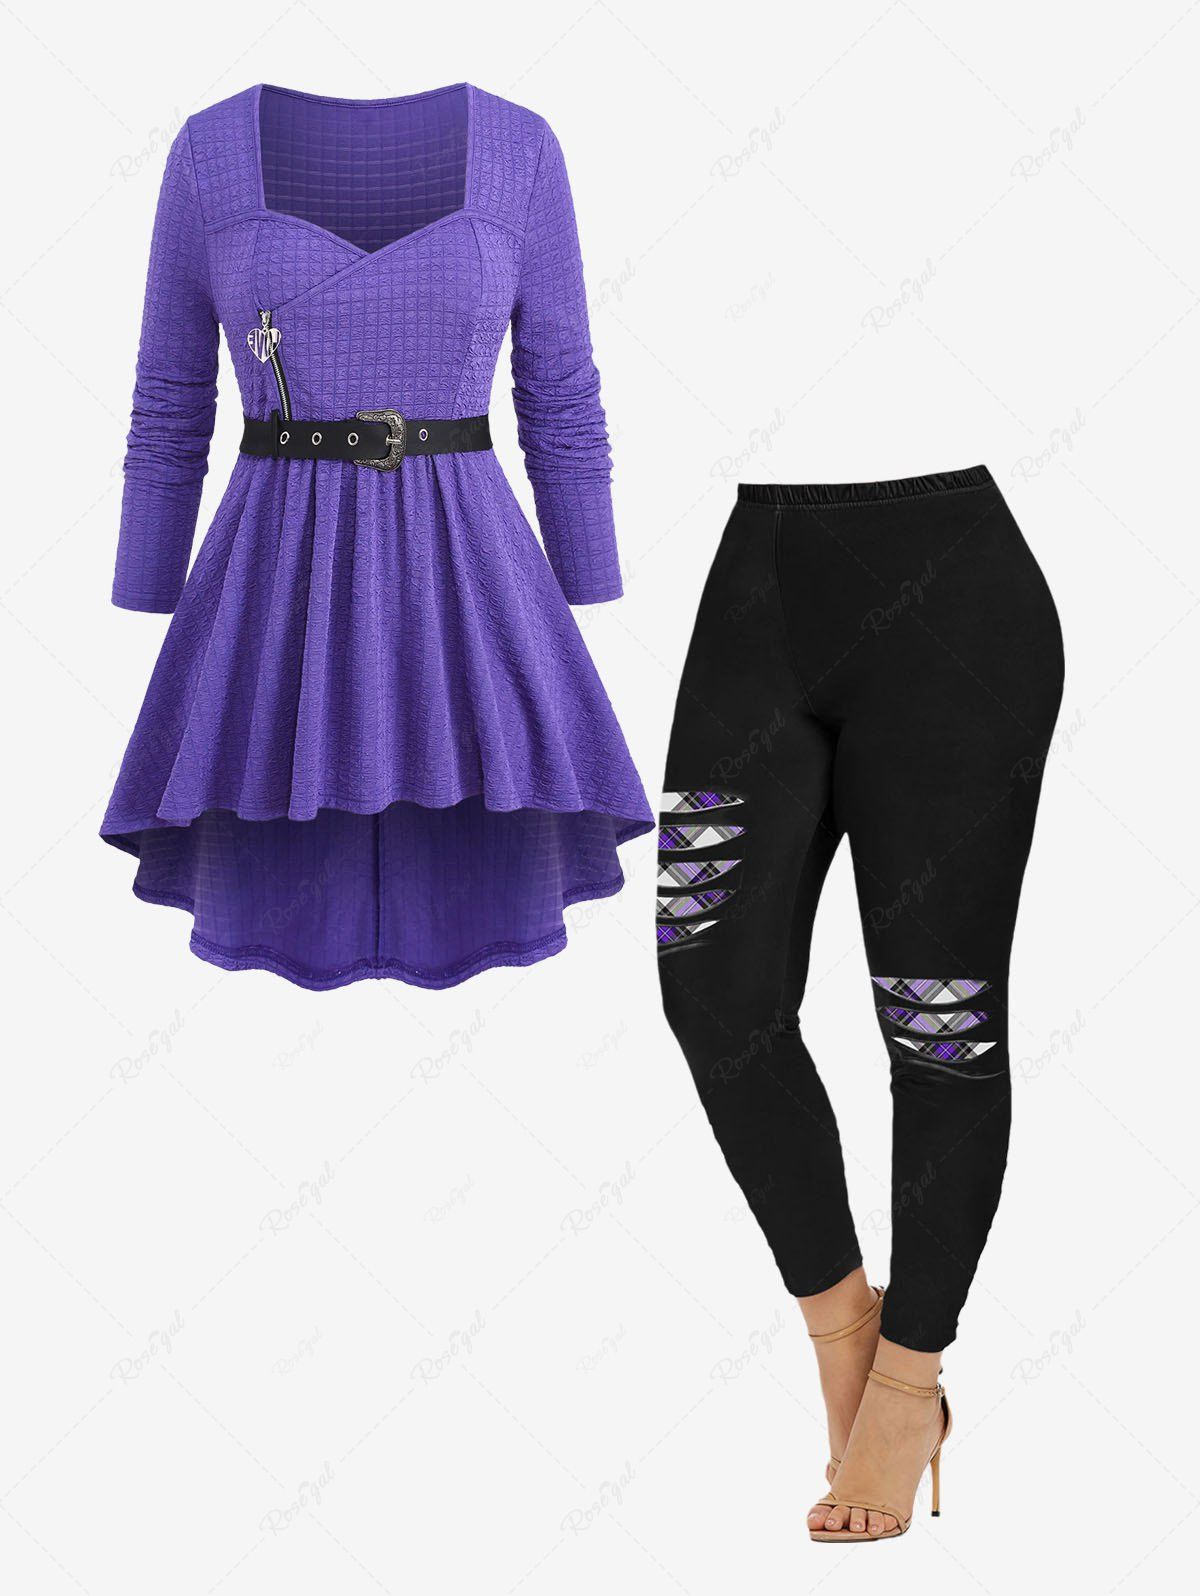 Store Heart Zipper Grommet Buckle Ruched Textured T-shirt and 3D Ripped Plaid Printed Leggings Plus Size Outfit  